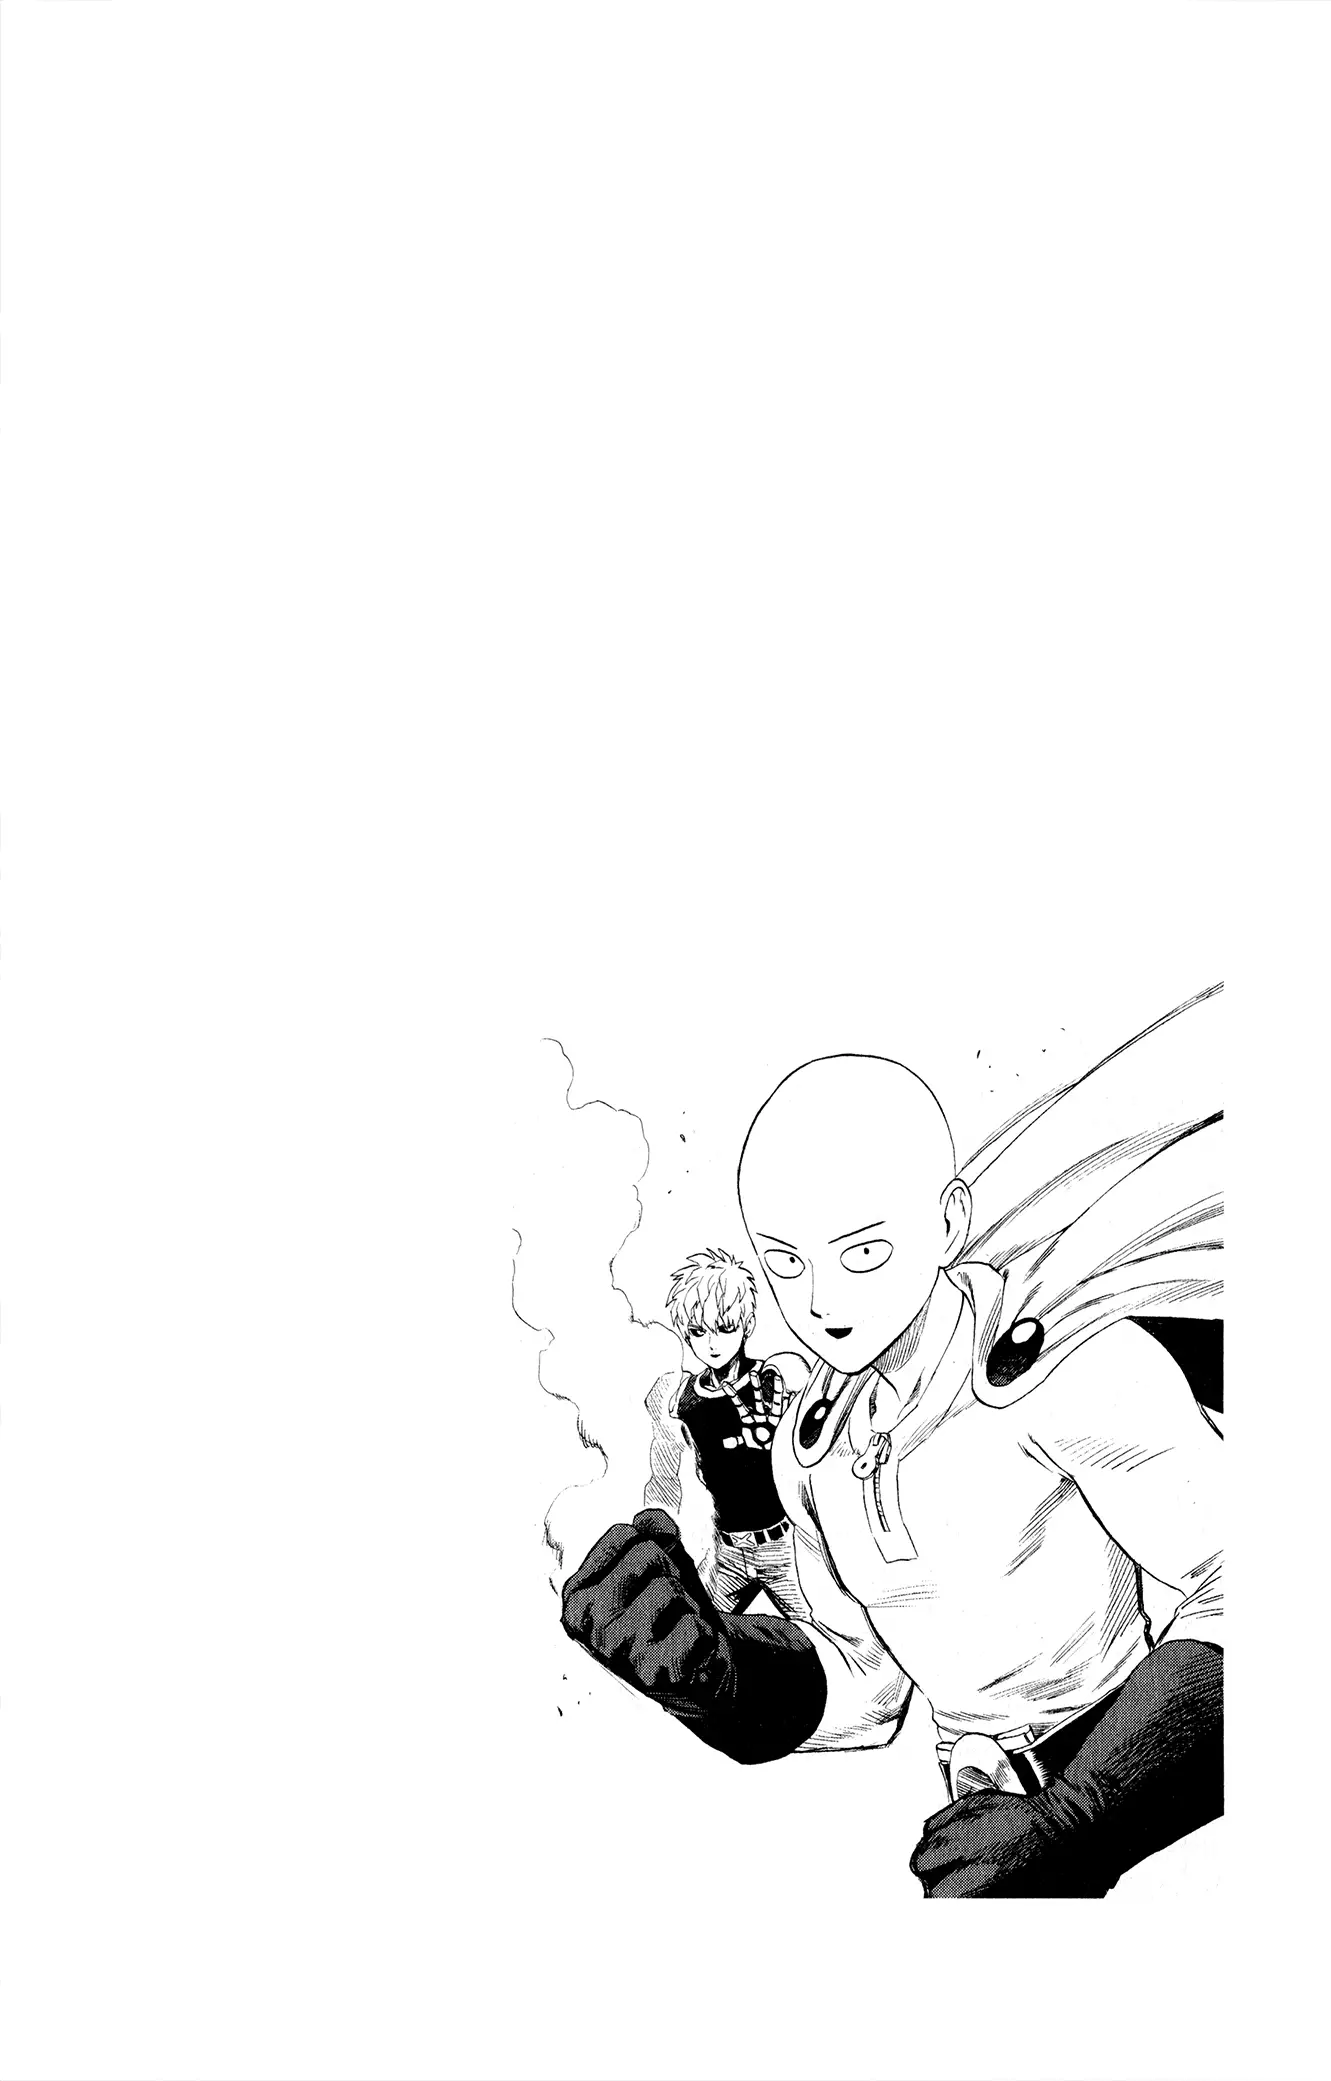 One Punch Man Chapter 167.5, READ One Punch Man Chapter 167.5 ONLINE, lost in the cloud genre,lost in the cloud gif,lost in the cloud girl,lost in the cloud goods,lost in the cloud goodreads,lost in the cloud,lost ark cloud gaming,lost odyssey cloud gaming,lost in the cloud fanart,lost in the cloud fanfic,lost in the cloud fandom,lost in the cloud first kiss,lost in the cloud font,lost in the cloud ending,lost in the cloud episode 97,lost in the cloud edit,lost in the cloud explained,lost in the cloud dog,lost in the cloud discord server,lost in the cloud desktop wallpaper,lost in the cloud drawing,can't find my cloud on network,lost in the cloud characters,lost in the cloud chapter 93 release date,lost in the cloud birthday,lost in the cloud birthday art,lost in the cloud background,lost in the cloud banner,lost in the clouds meaning,what is the black cloud in lost,lost in the cloud ao3,lost in the cloud anime,lost in the cloud art,lost in the cloud author twitter,lost in the cloud author instagram,lost in the cloud artist,lost in the cloud acrylic stand,lost in the cloud artist twitter,lost in the cloud art style,lost in the cloud analysis